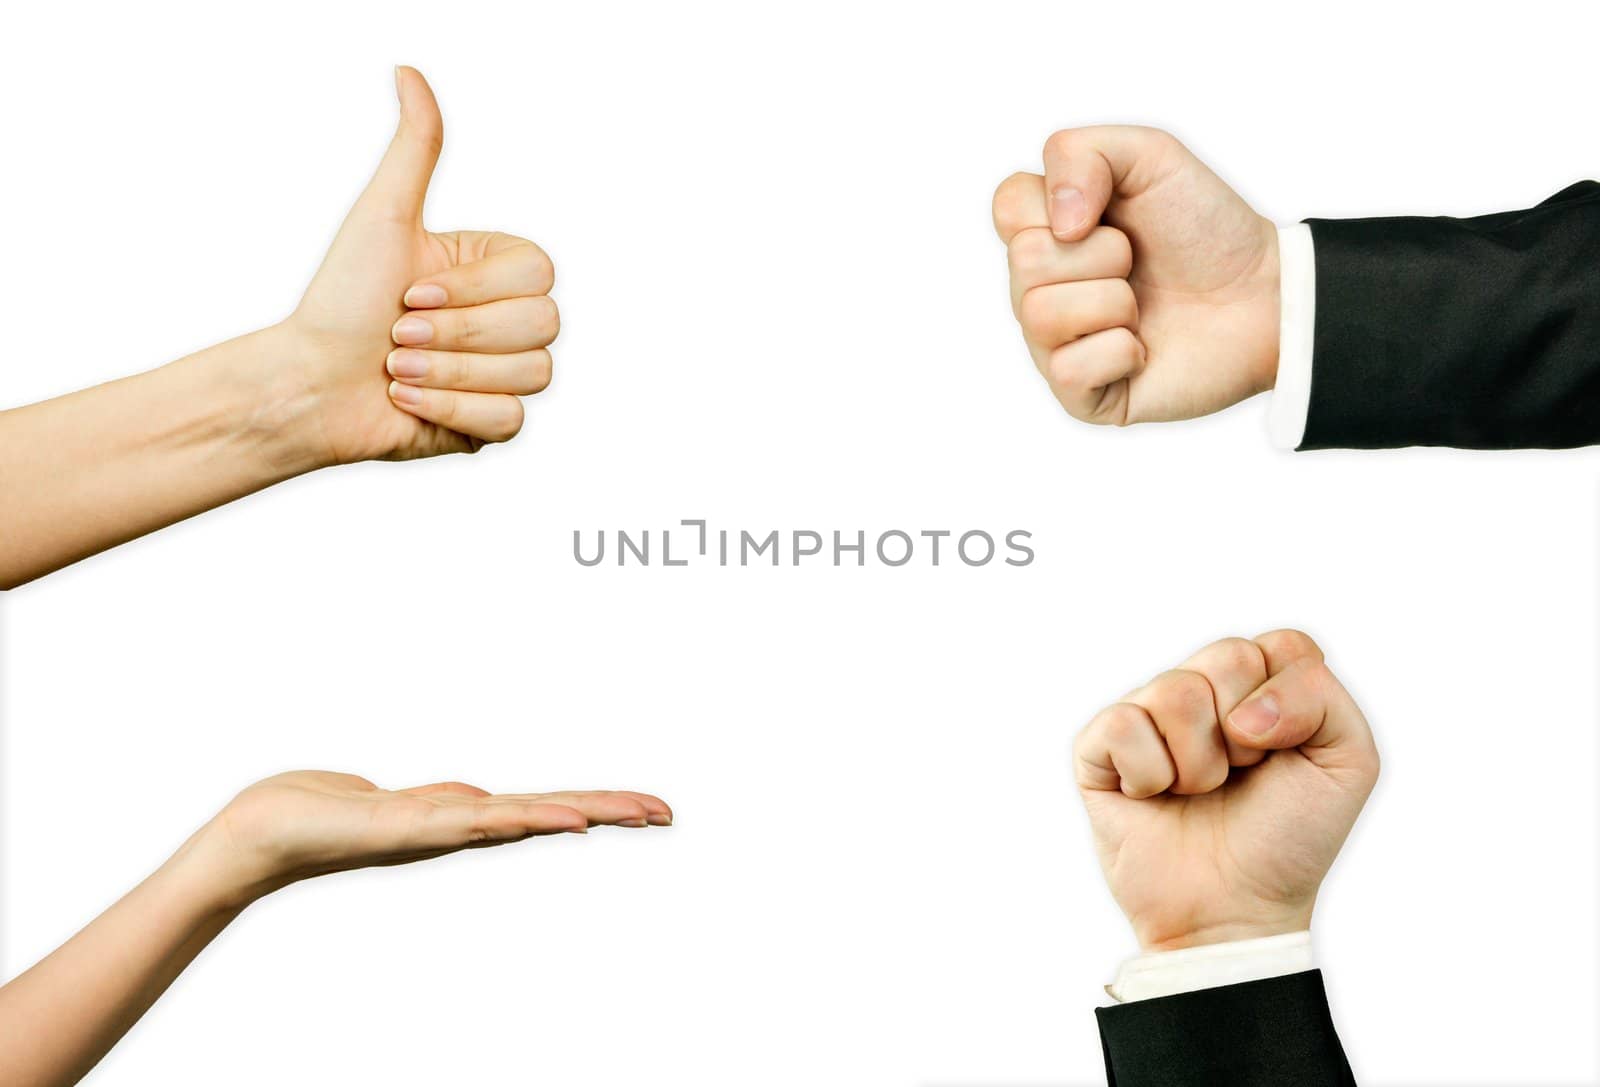 Hand gestures set, isolated on white by simpson33